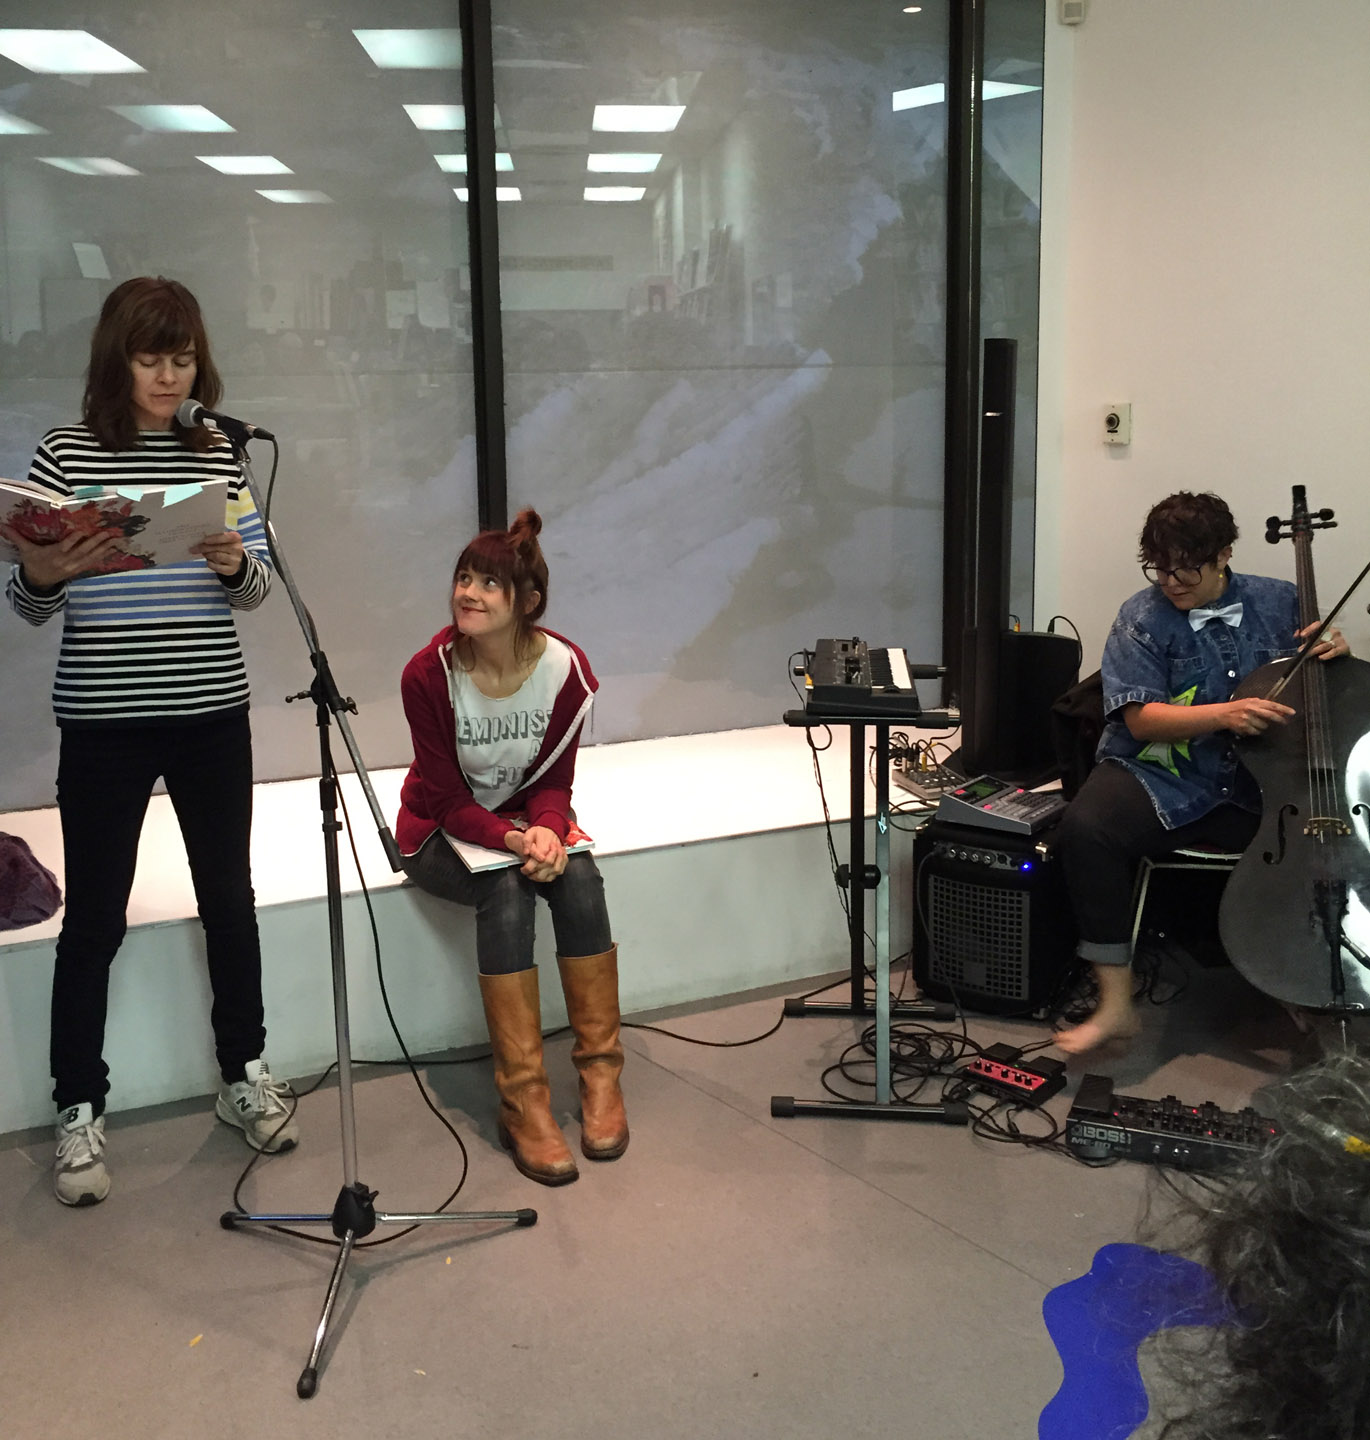 Shary reads, Emily smiles, and Cris Derksen lays down some heavy pedal cello. Art Metropole book launch for The Illuminations Project, Toronto, October 24, 2015